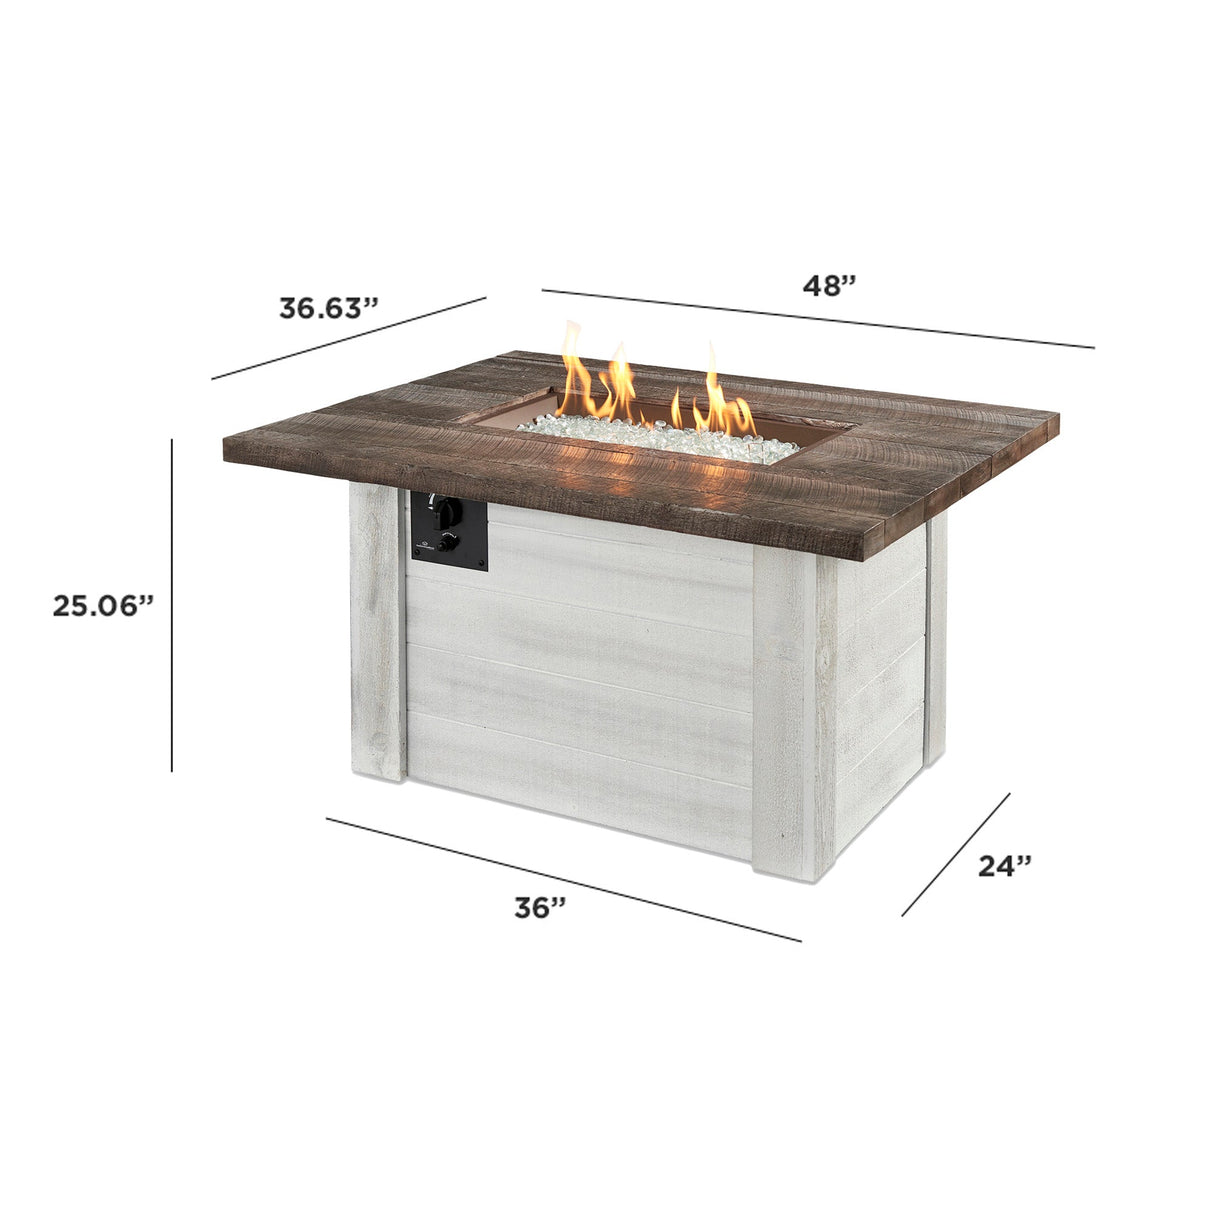 Dimensions overlaid on the Alcott Rectangular Gas Fire Pit Table